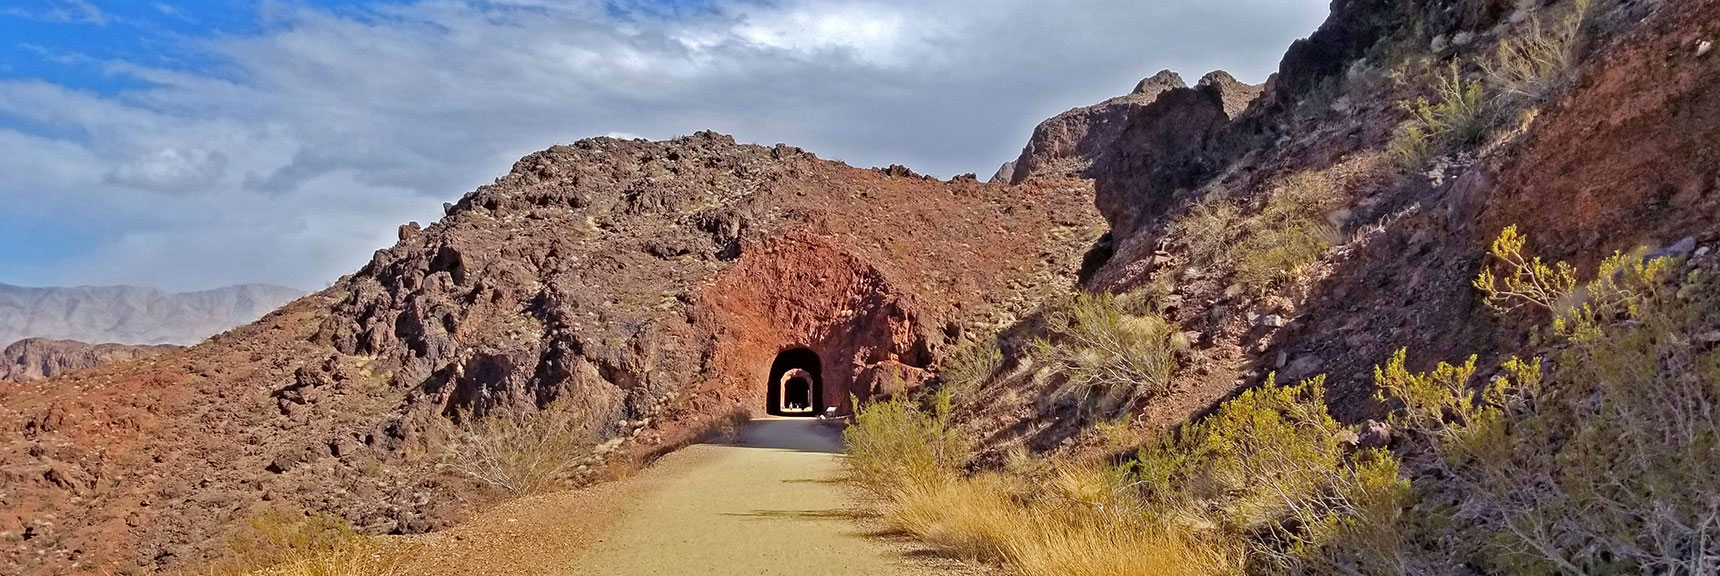 Approaching the First of 5 Railroad Tunnels | Historic Railroad Trail | Lake Mead National Recreation Area, Nevada